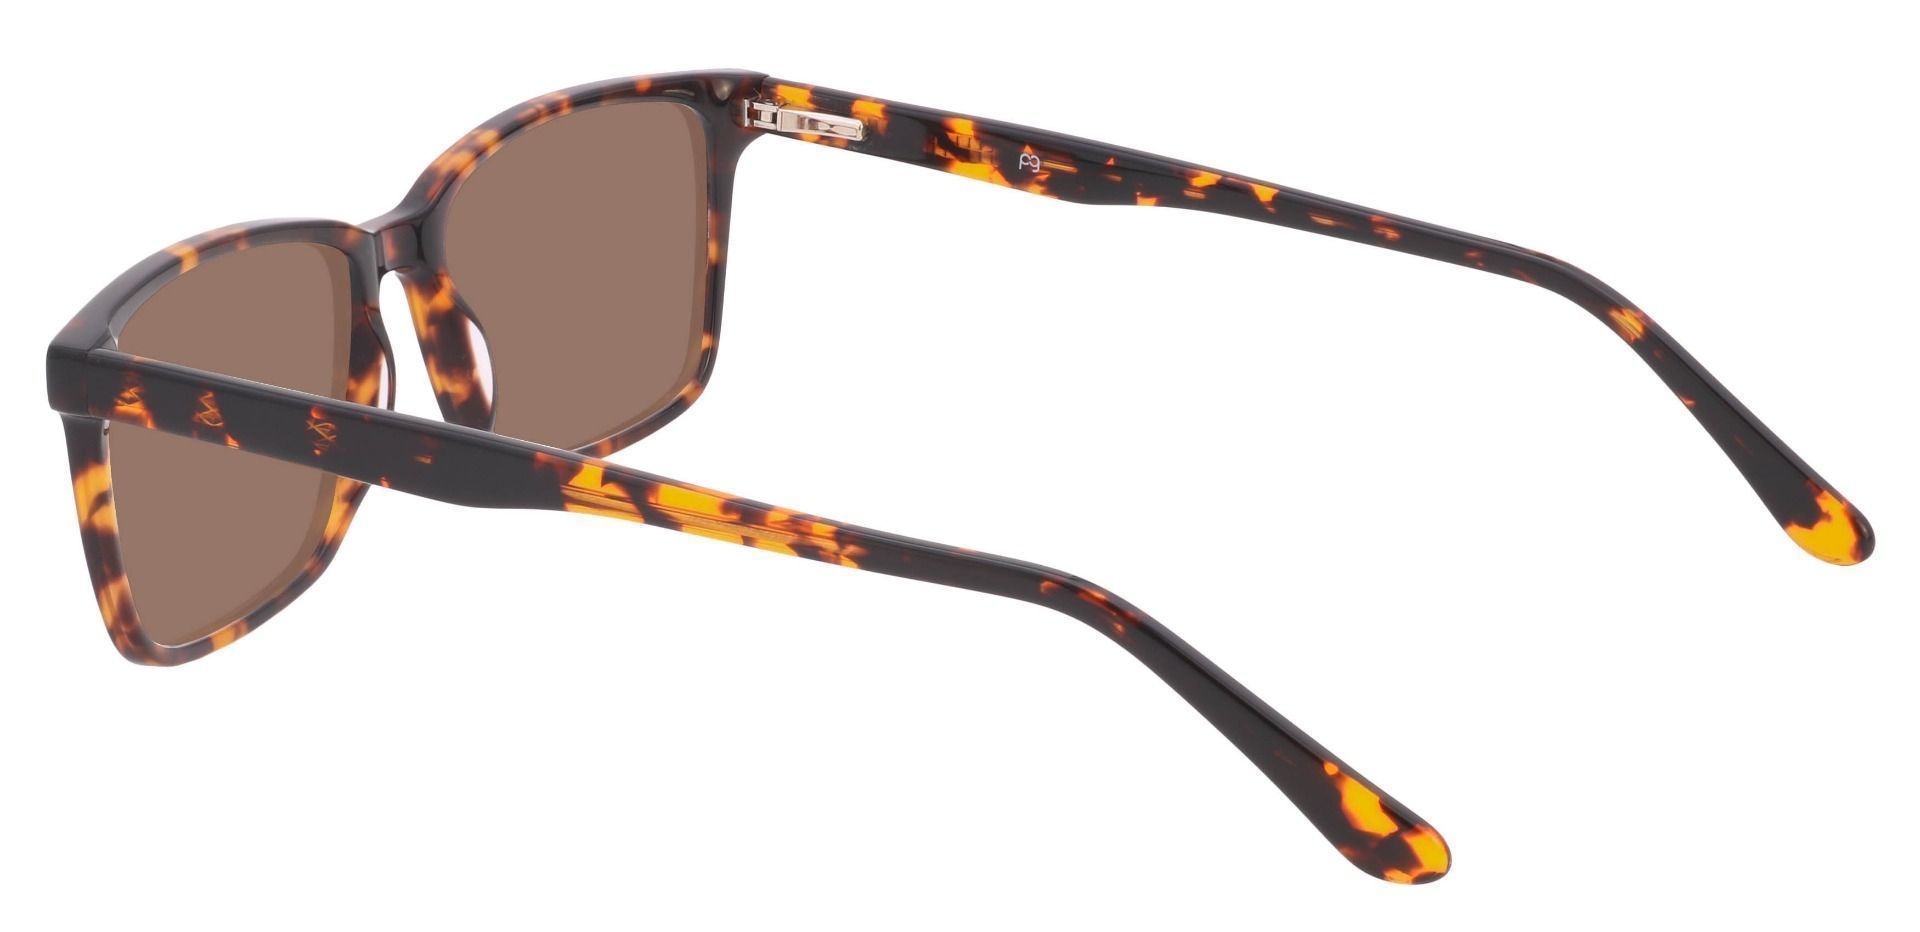 Venice Rectangle Lined Bifocal Sunglasses - Tortoise Frame With Brown Lenses